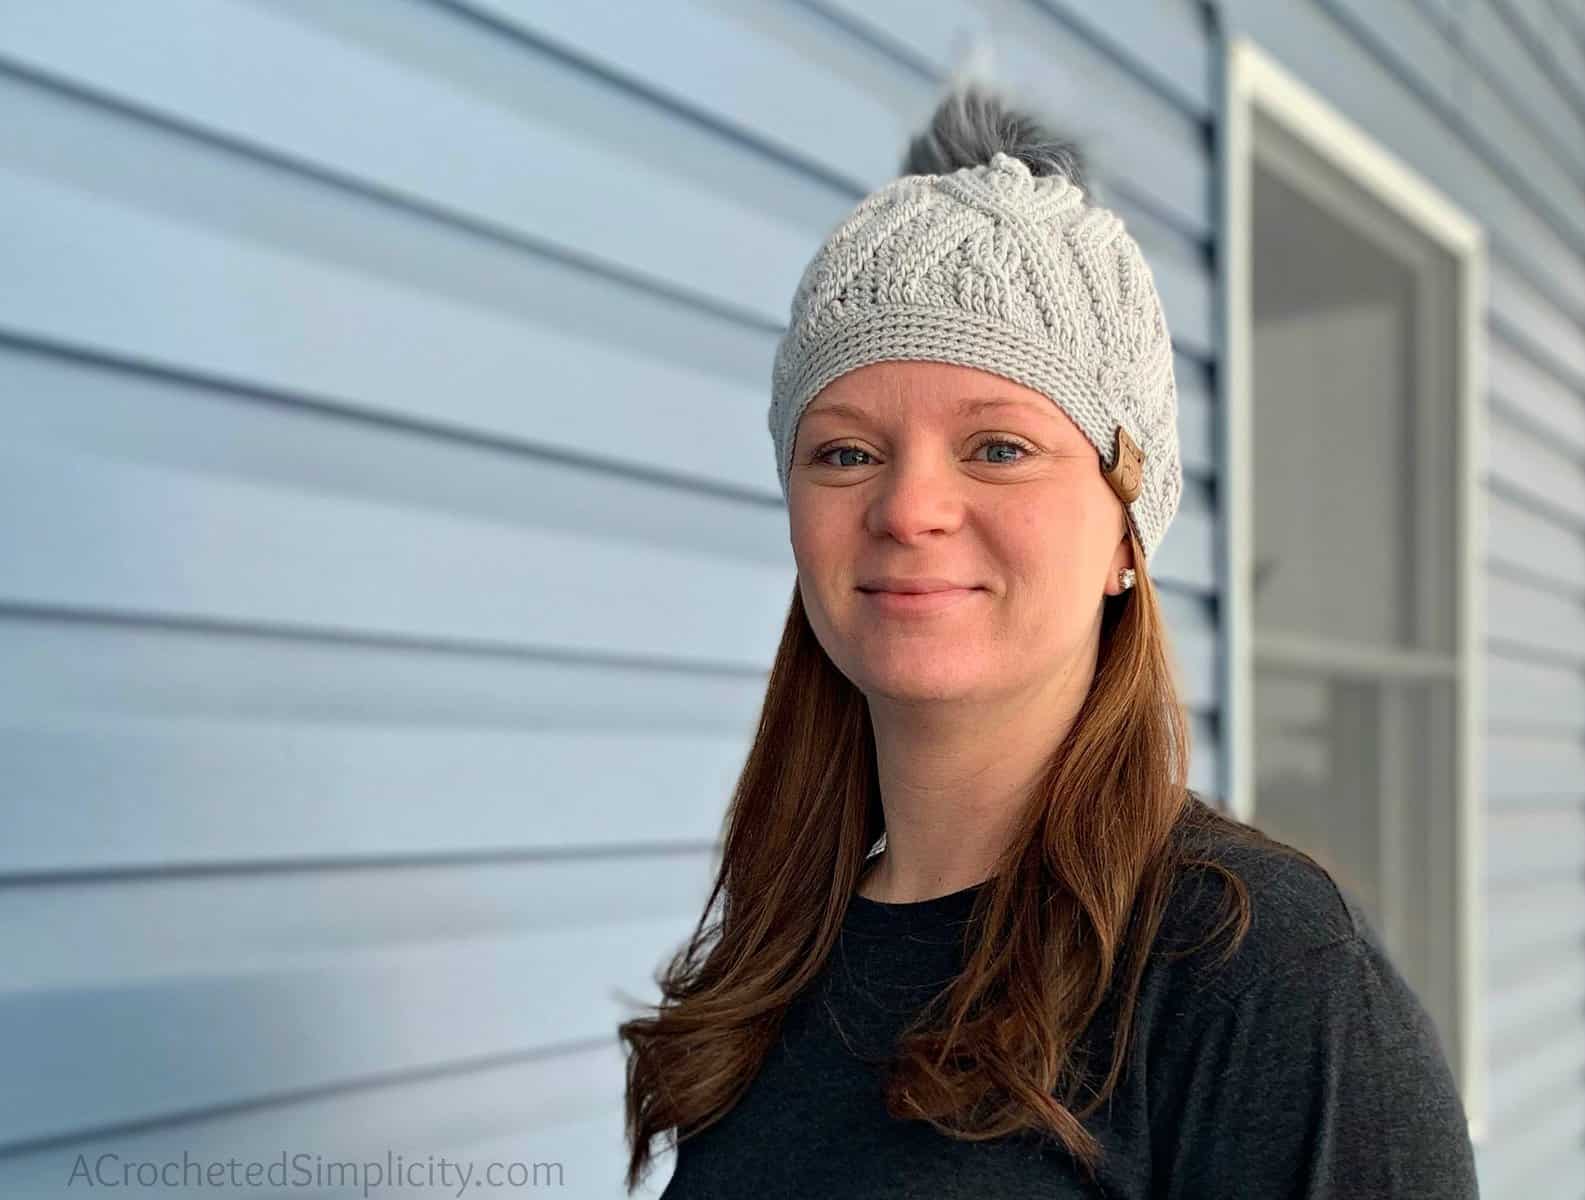 Free Crochet Pattern - Diamonds & Twists Cabled Beanie by A Crocheted Simplicity #freecrochetpattern #cabledbeanie #crochetcables #crochetcablepattern #crochetbeaniepattern #crochethatpattern #cabledhatpattern #crochet